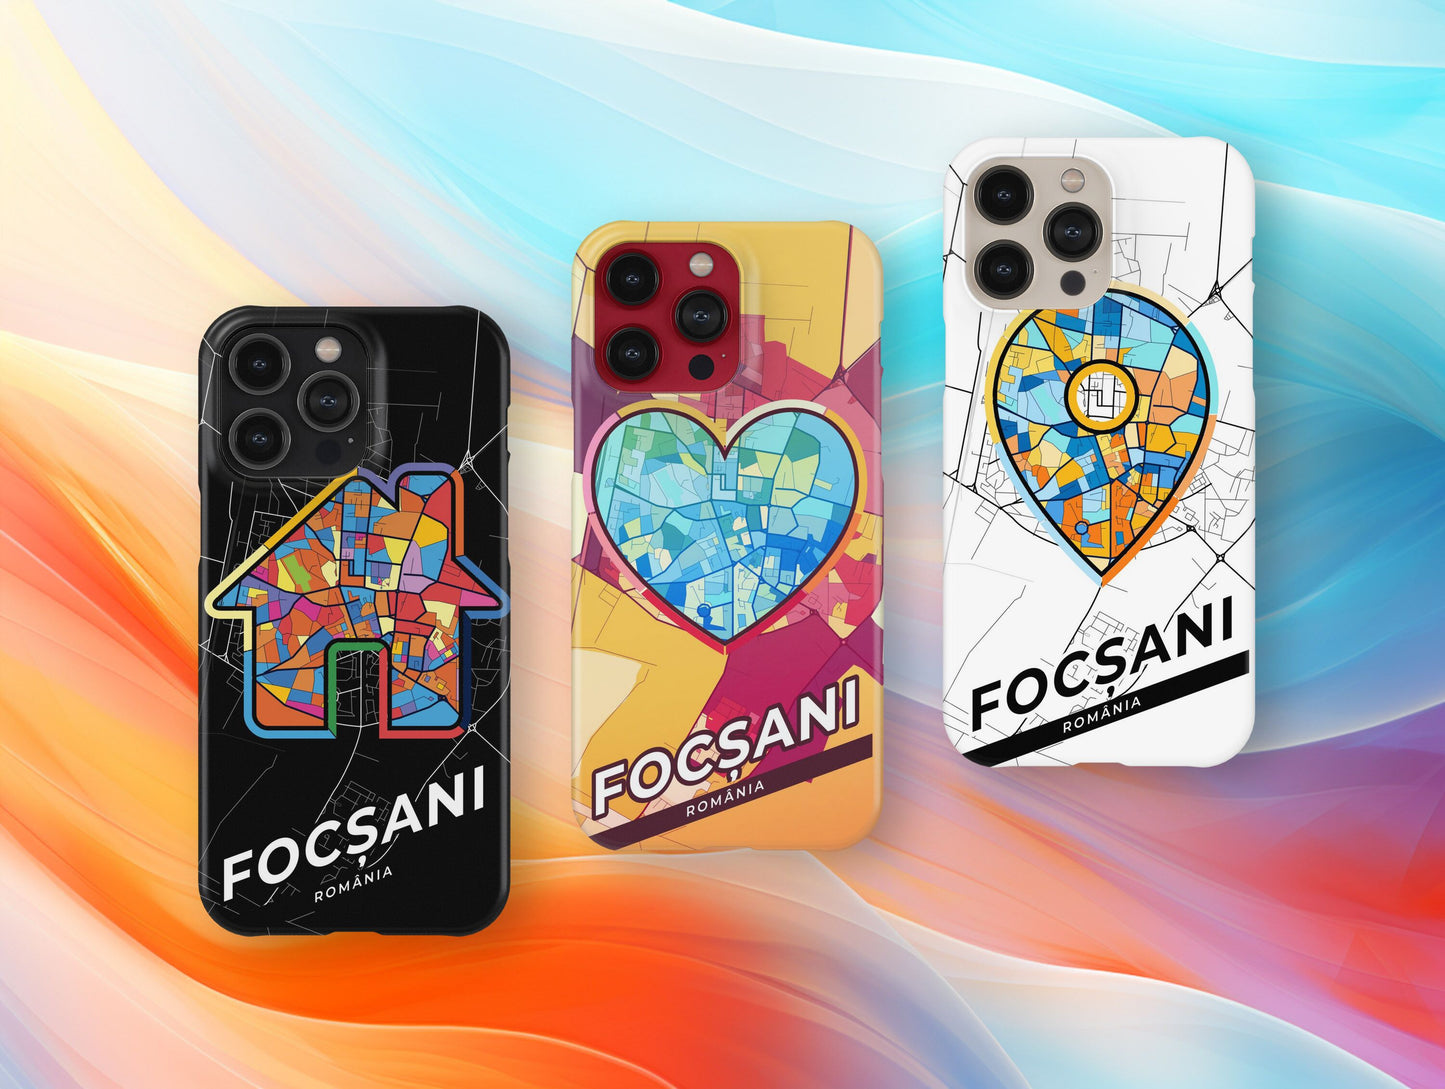 Focșani Romania slim phone case with colorful icon. Birthday, wedding or housewarming gift. Couple match cases.